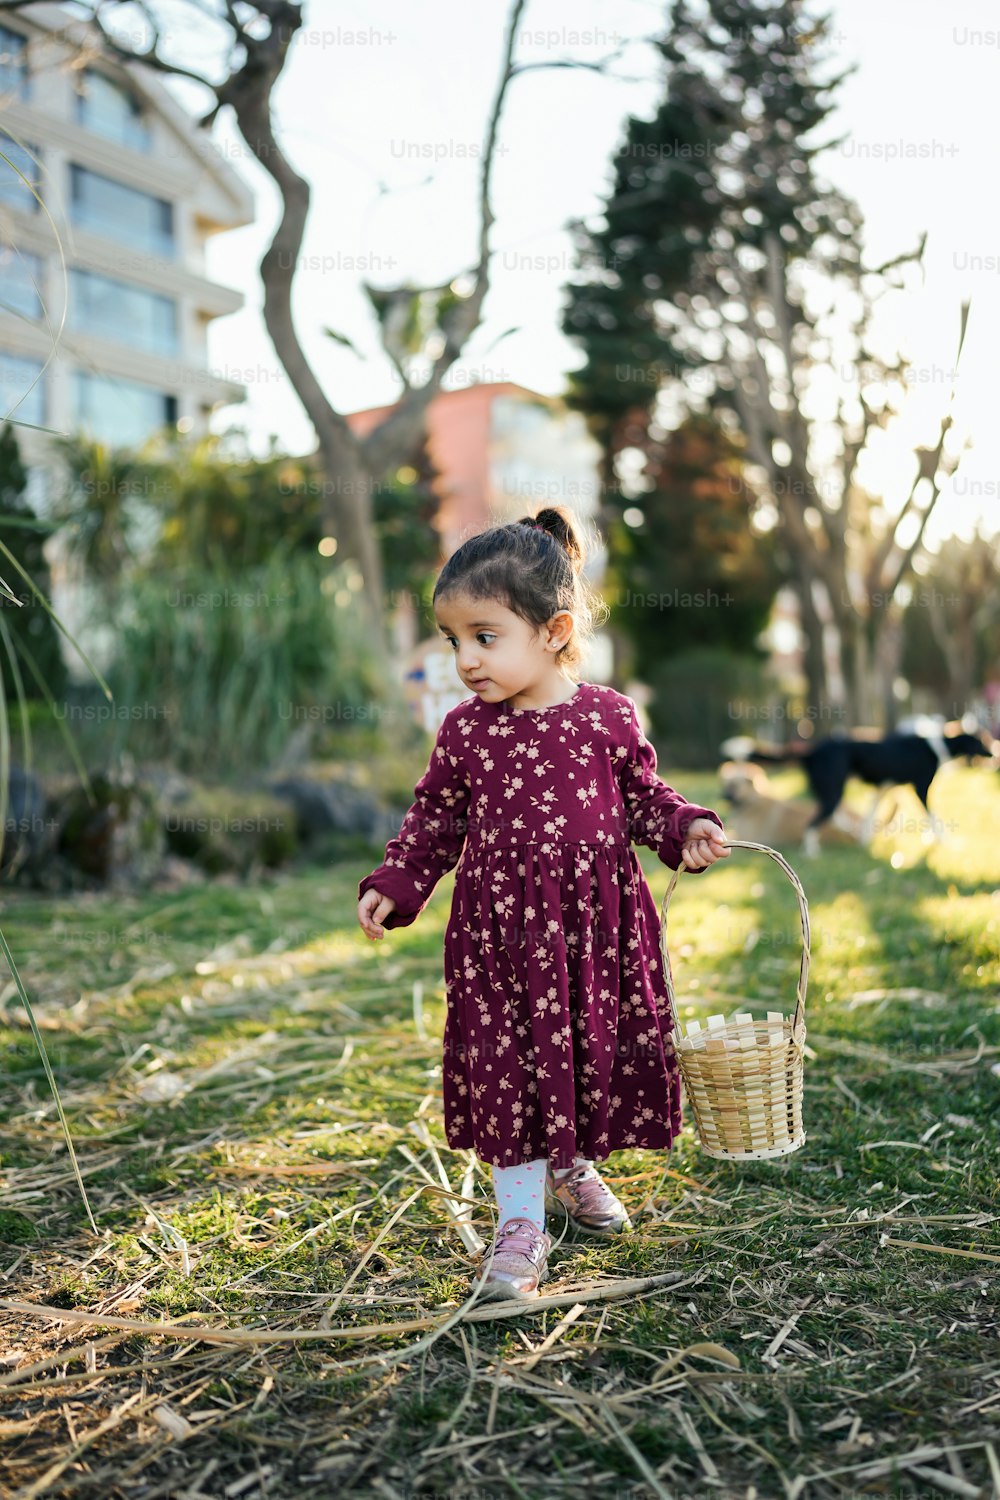 a little girl holding a basket in the grass